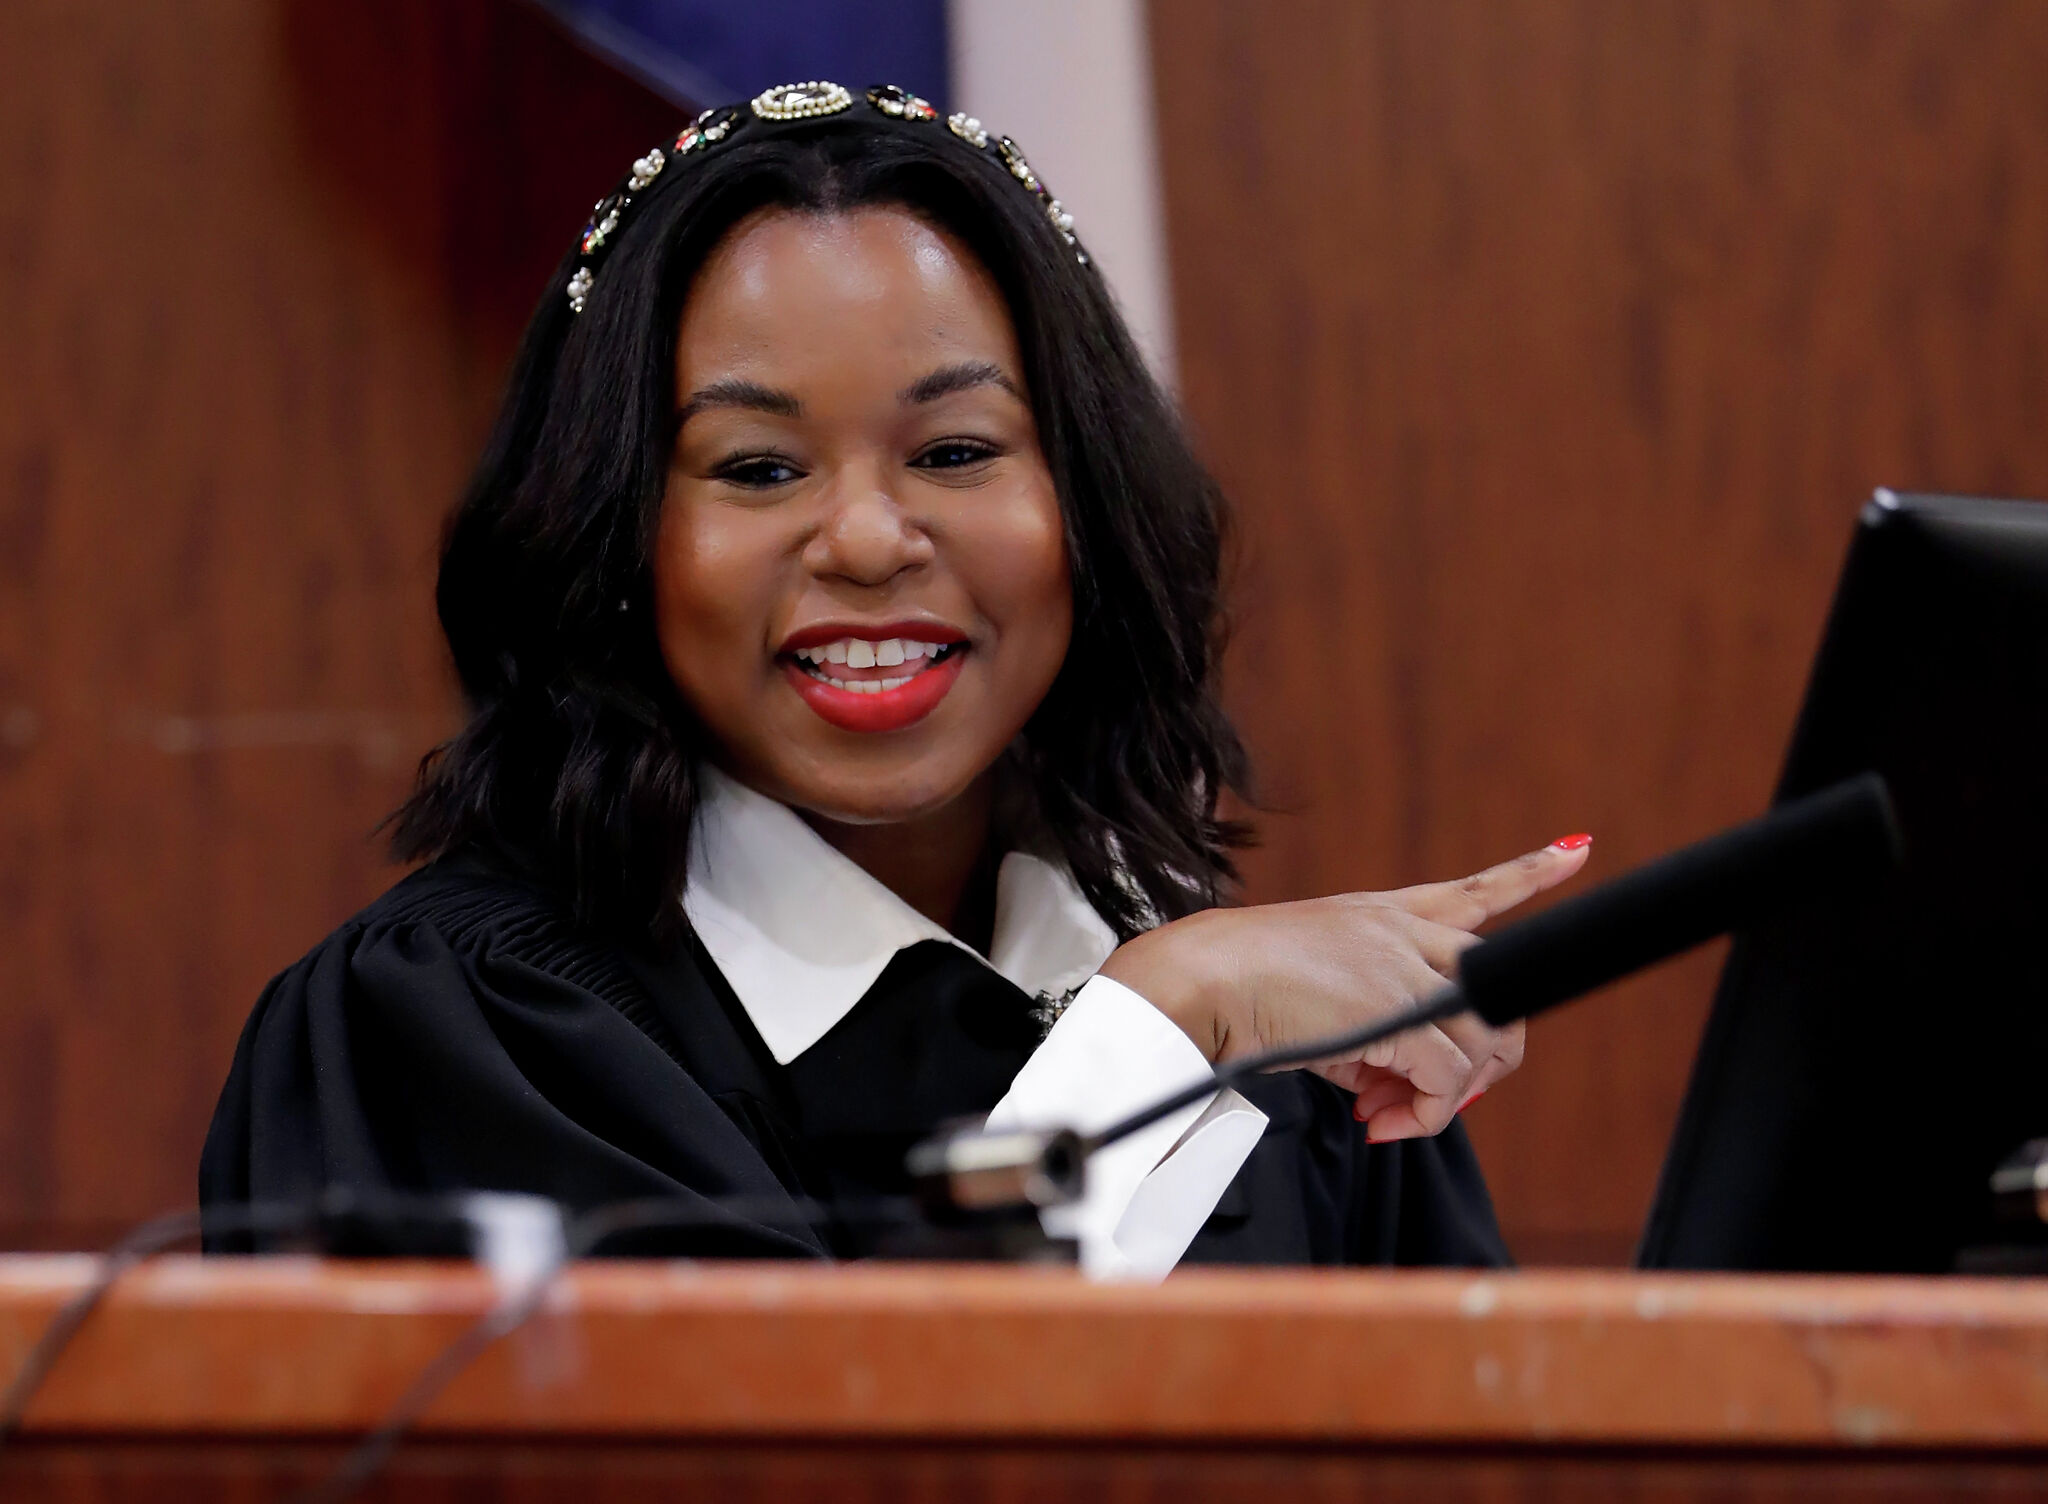 The Sugar Land native became the youngest district judge in Texas